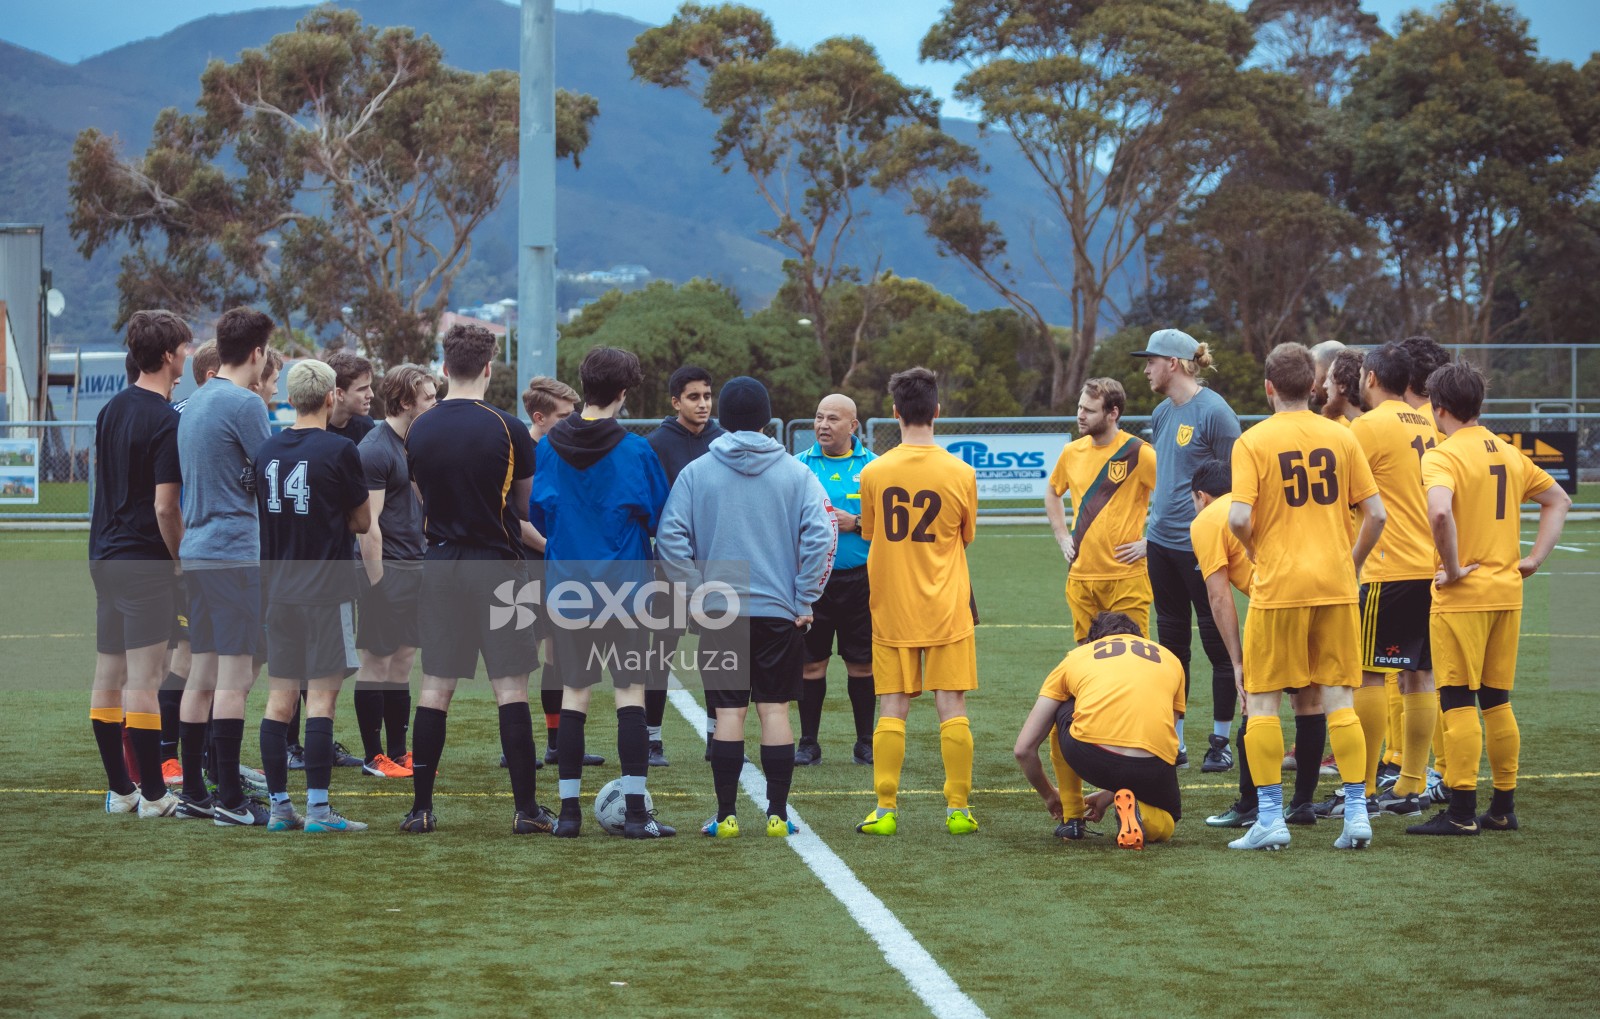 Referee addressing both teams before a football match - Sports Zone sunday league